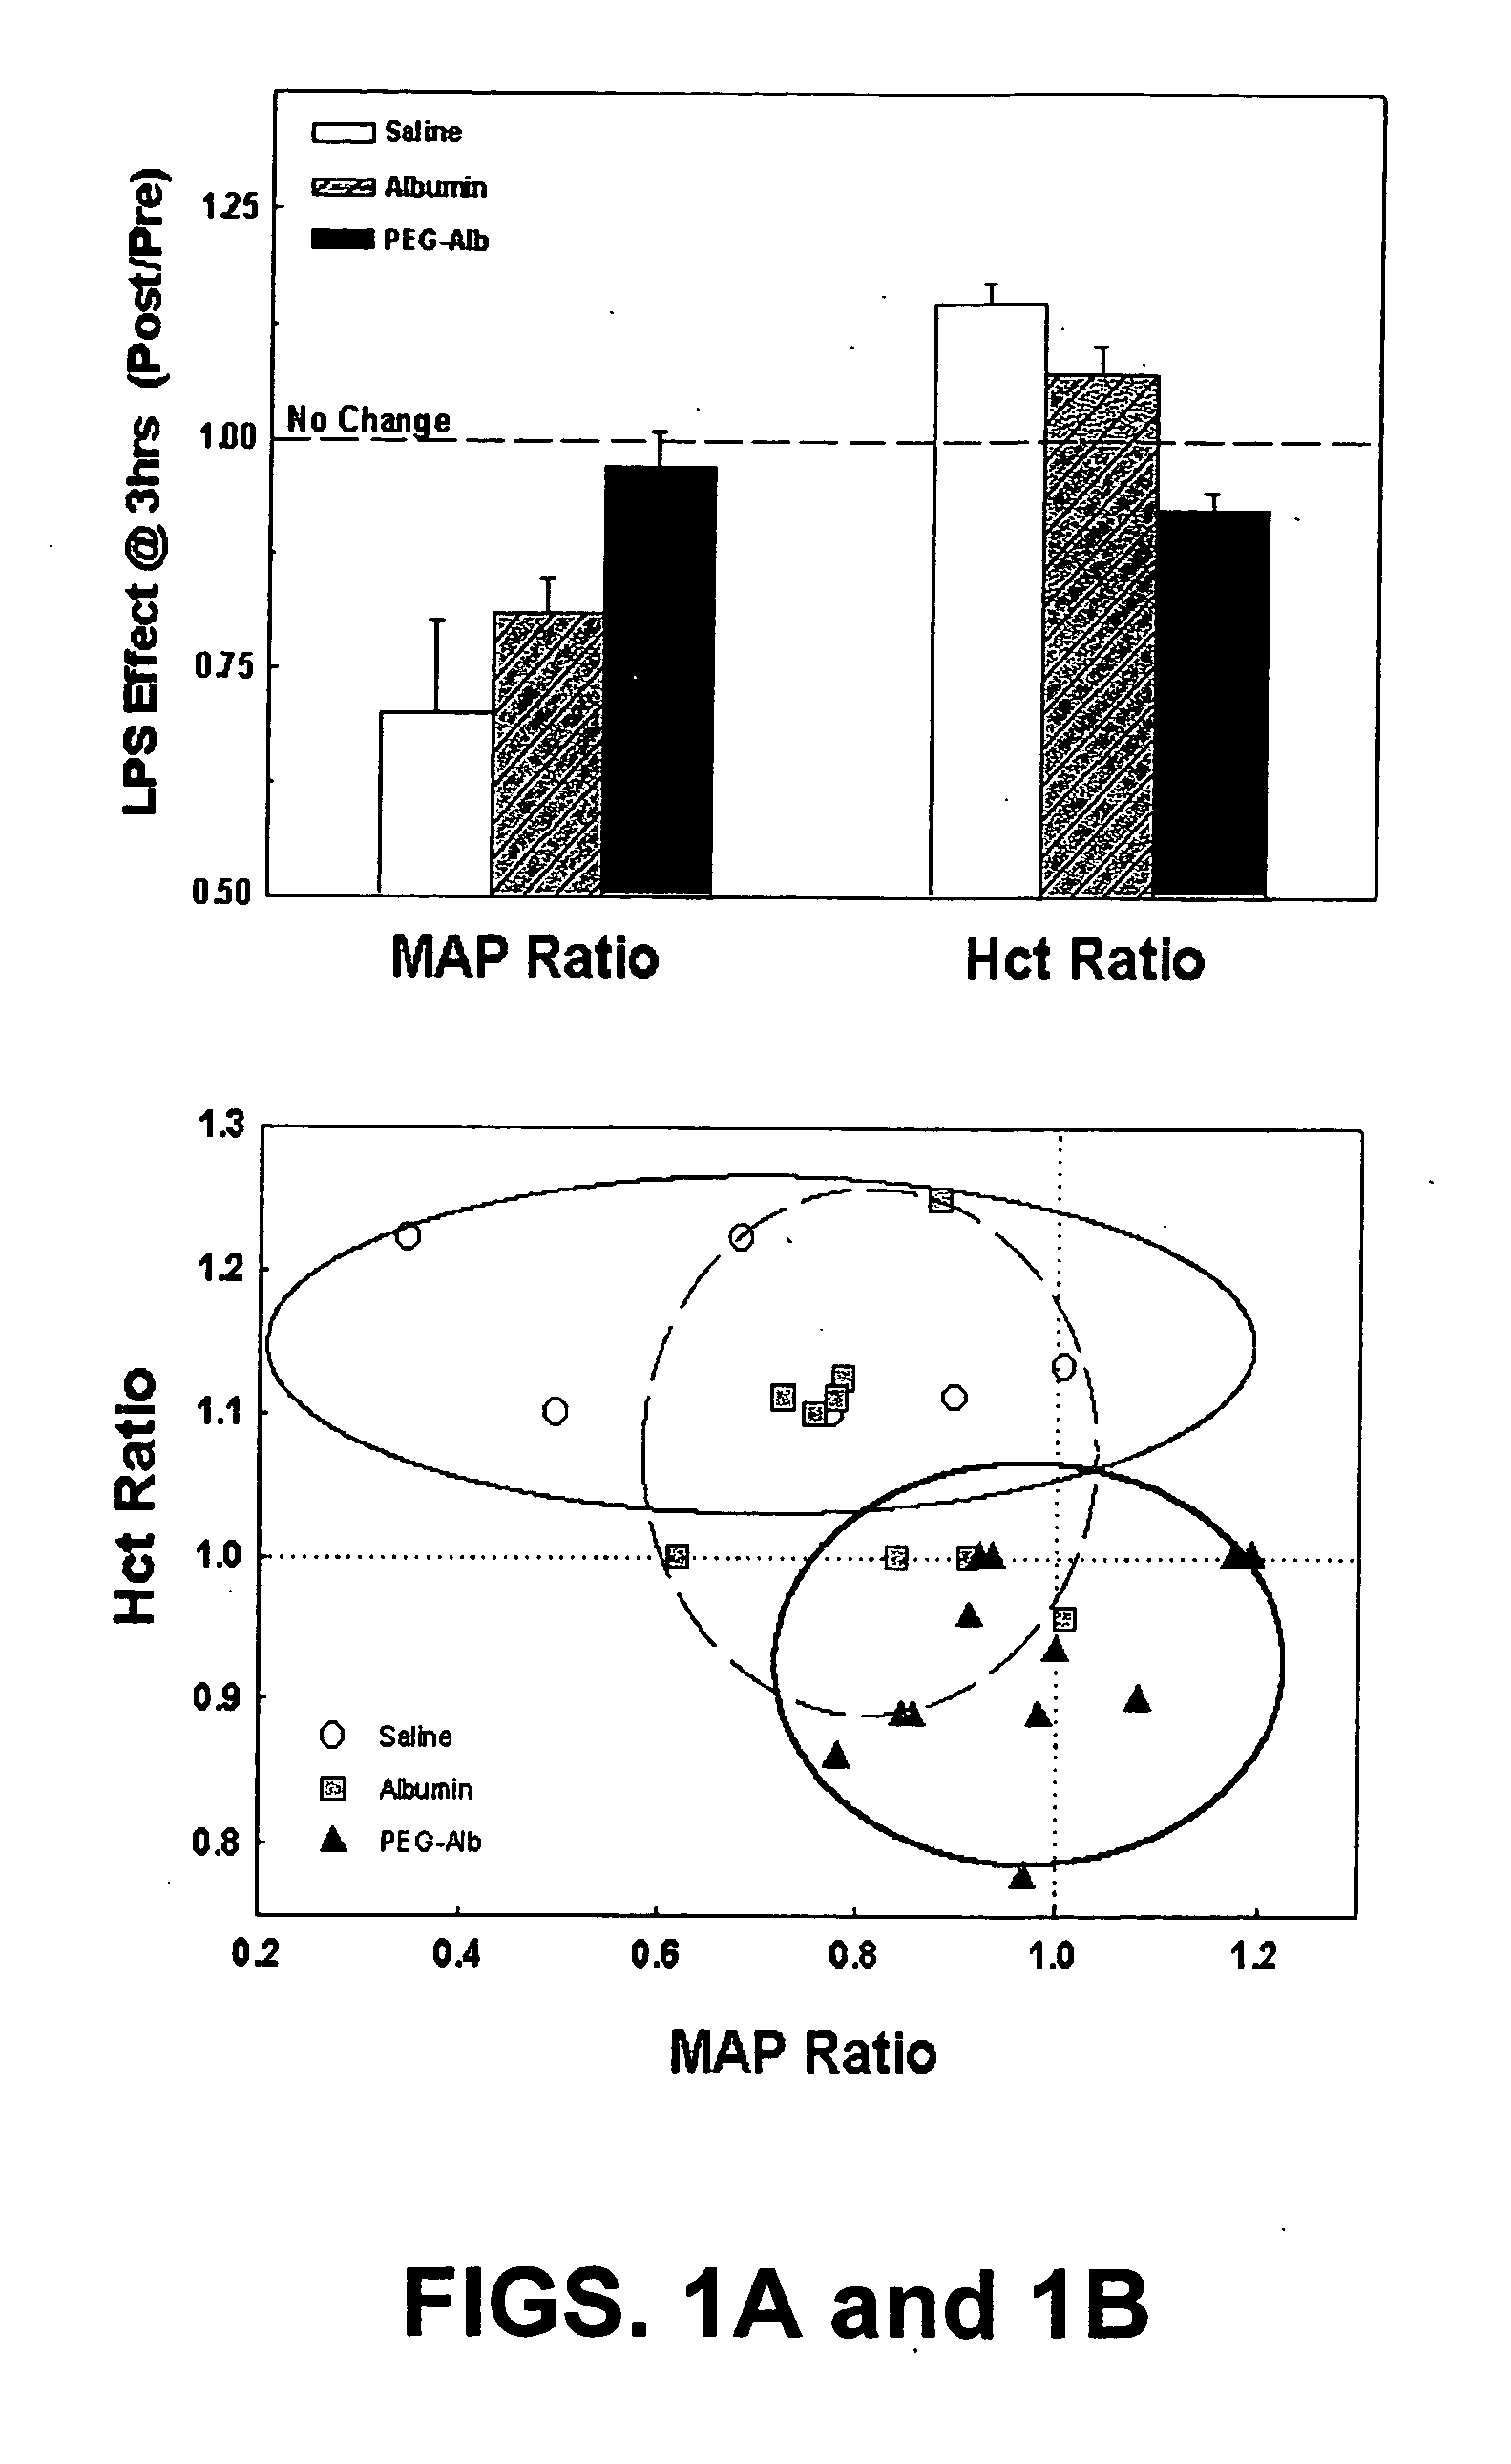 Albumin-based colloid composition having at least one protected thiol region, methods of making, and methods of use